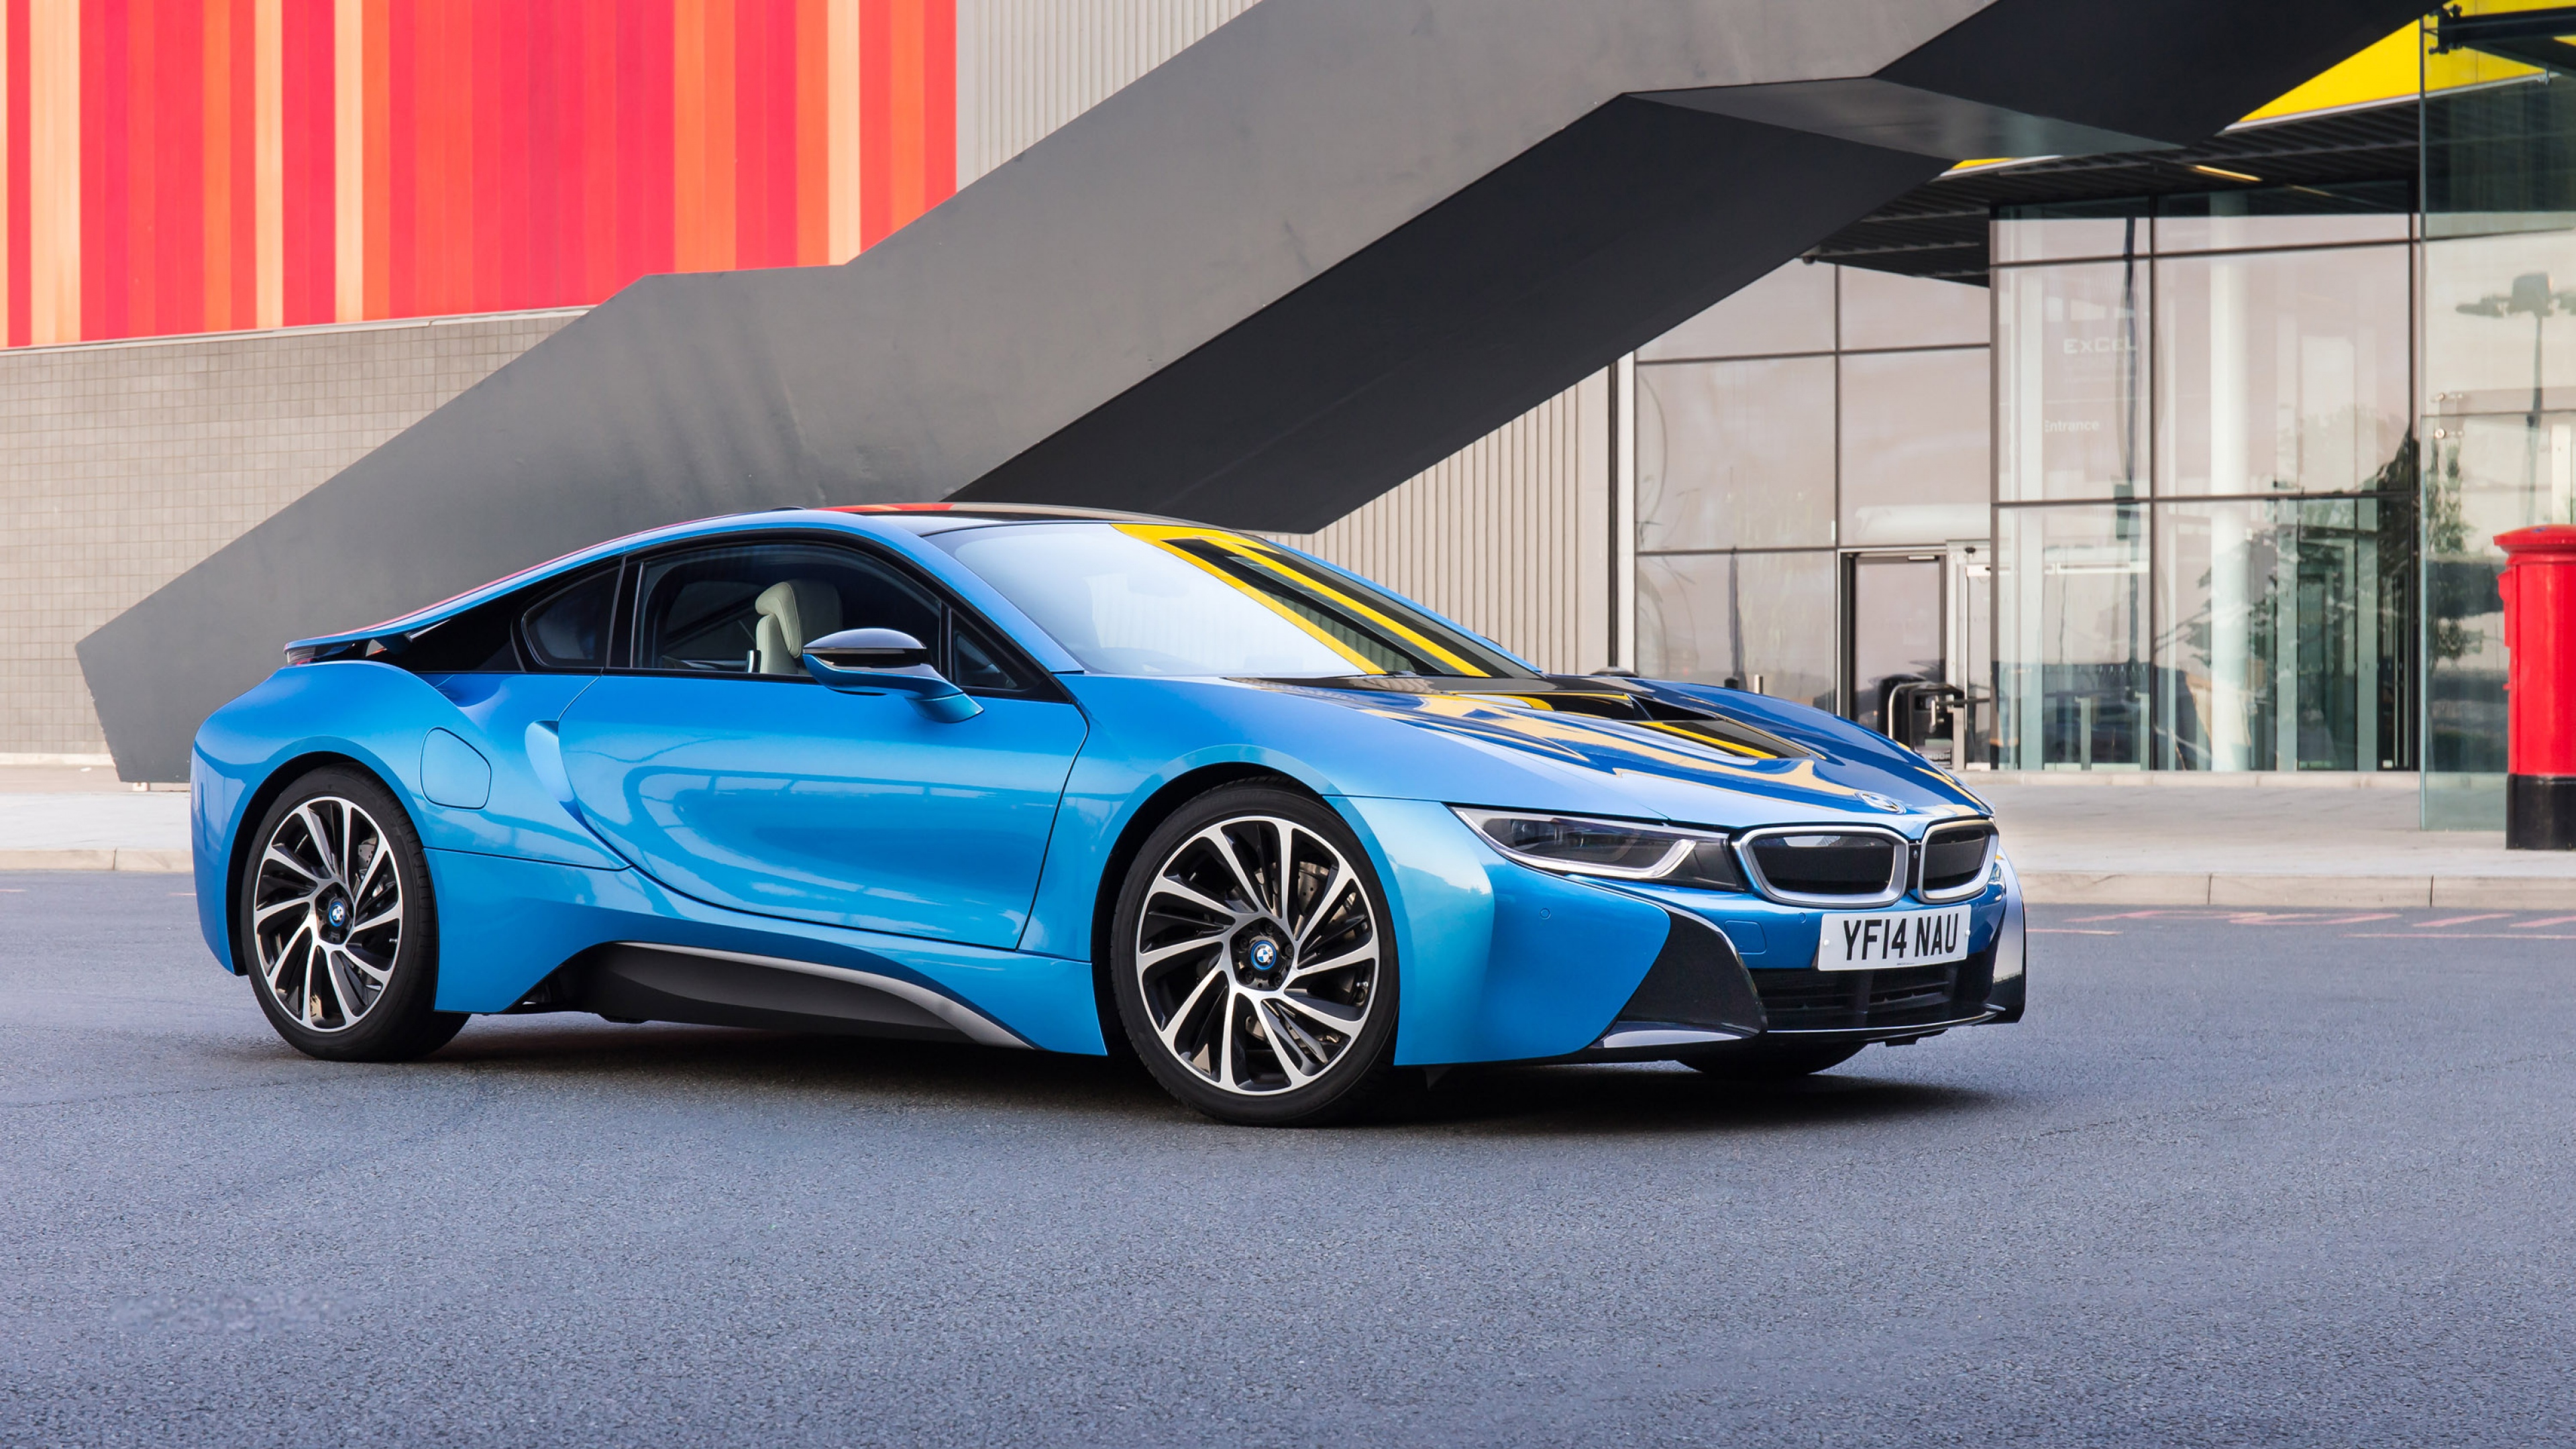 2015 Bmw I8 Coupe Front Wallpaper 2015 Bmw I8 Interior For